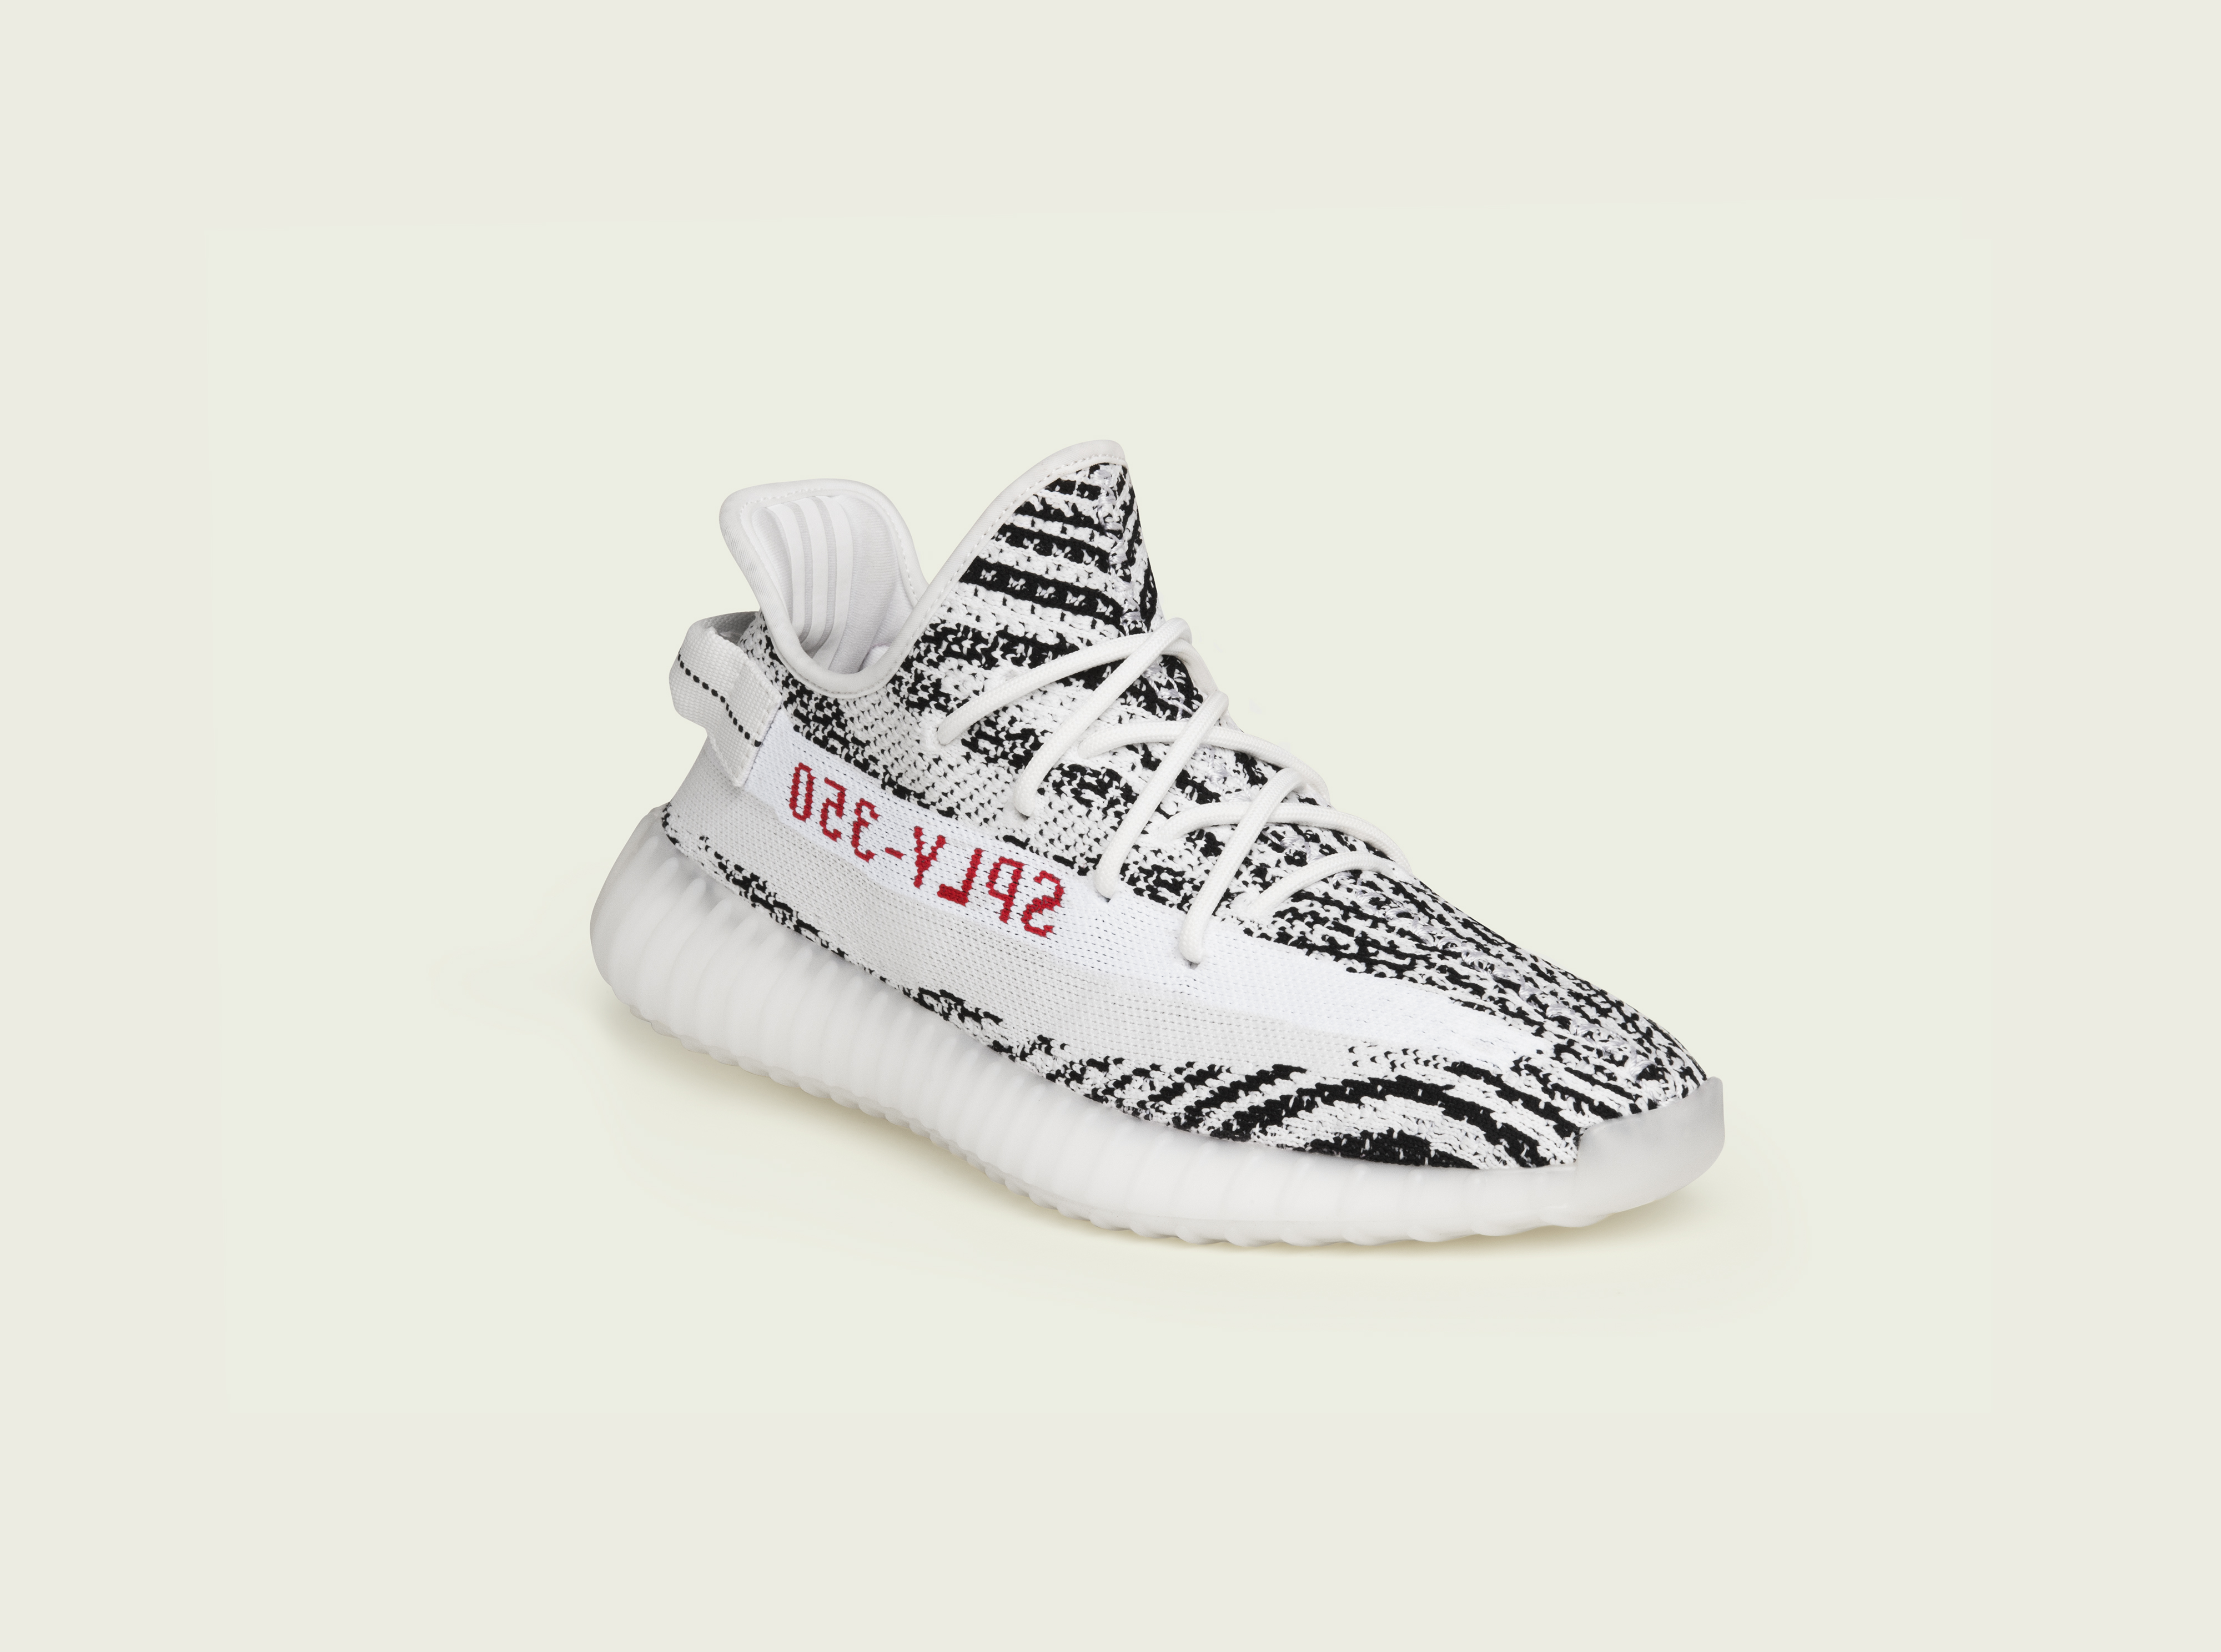 when do the yeezy zebras come out